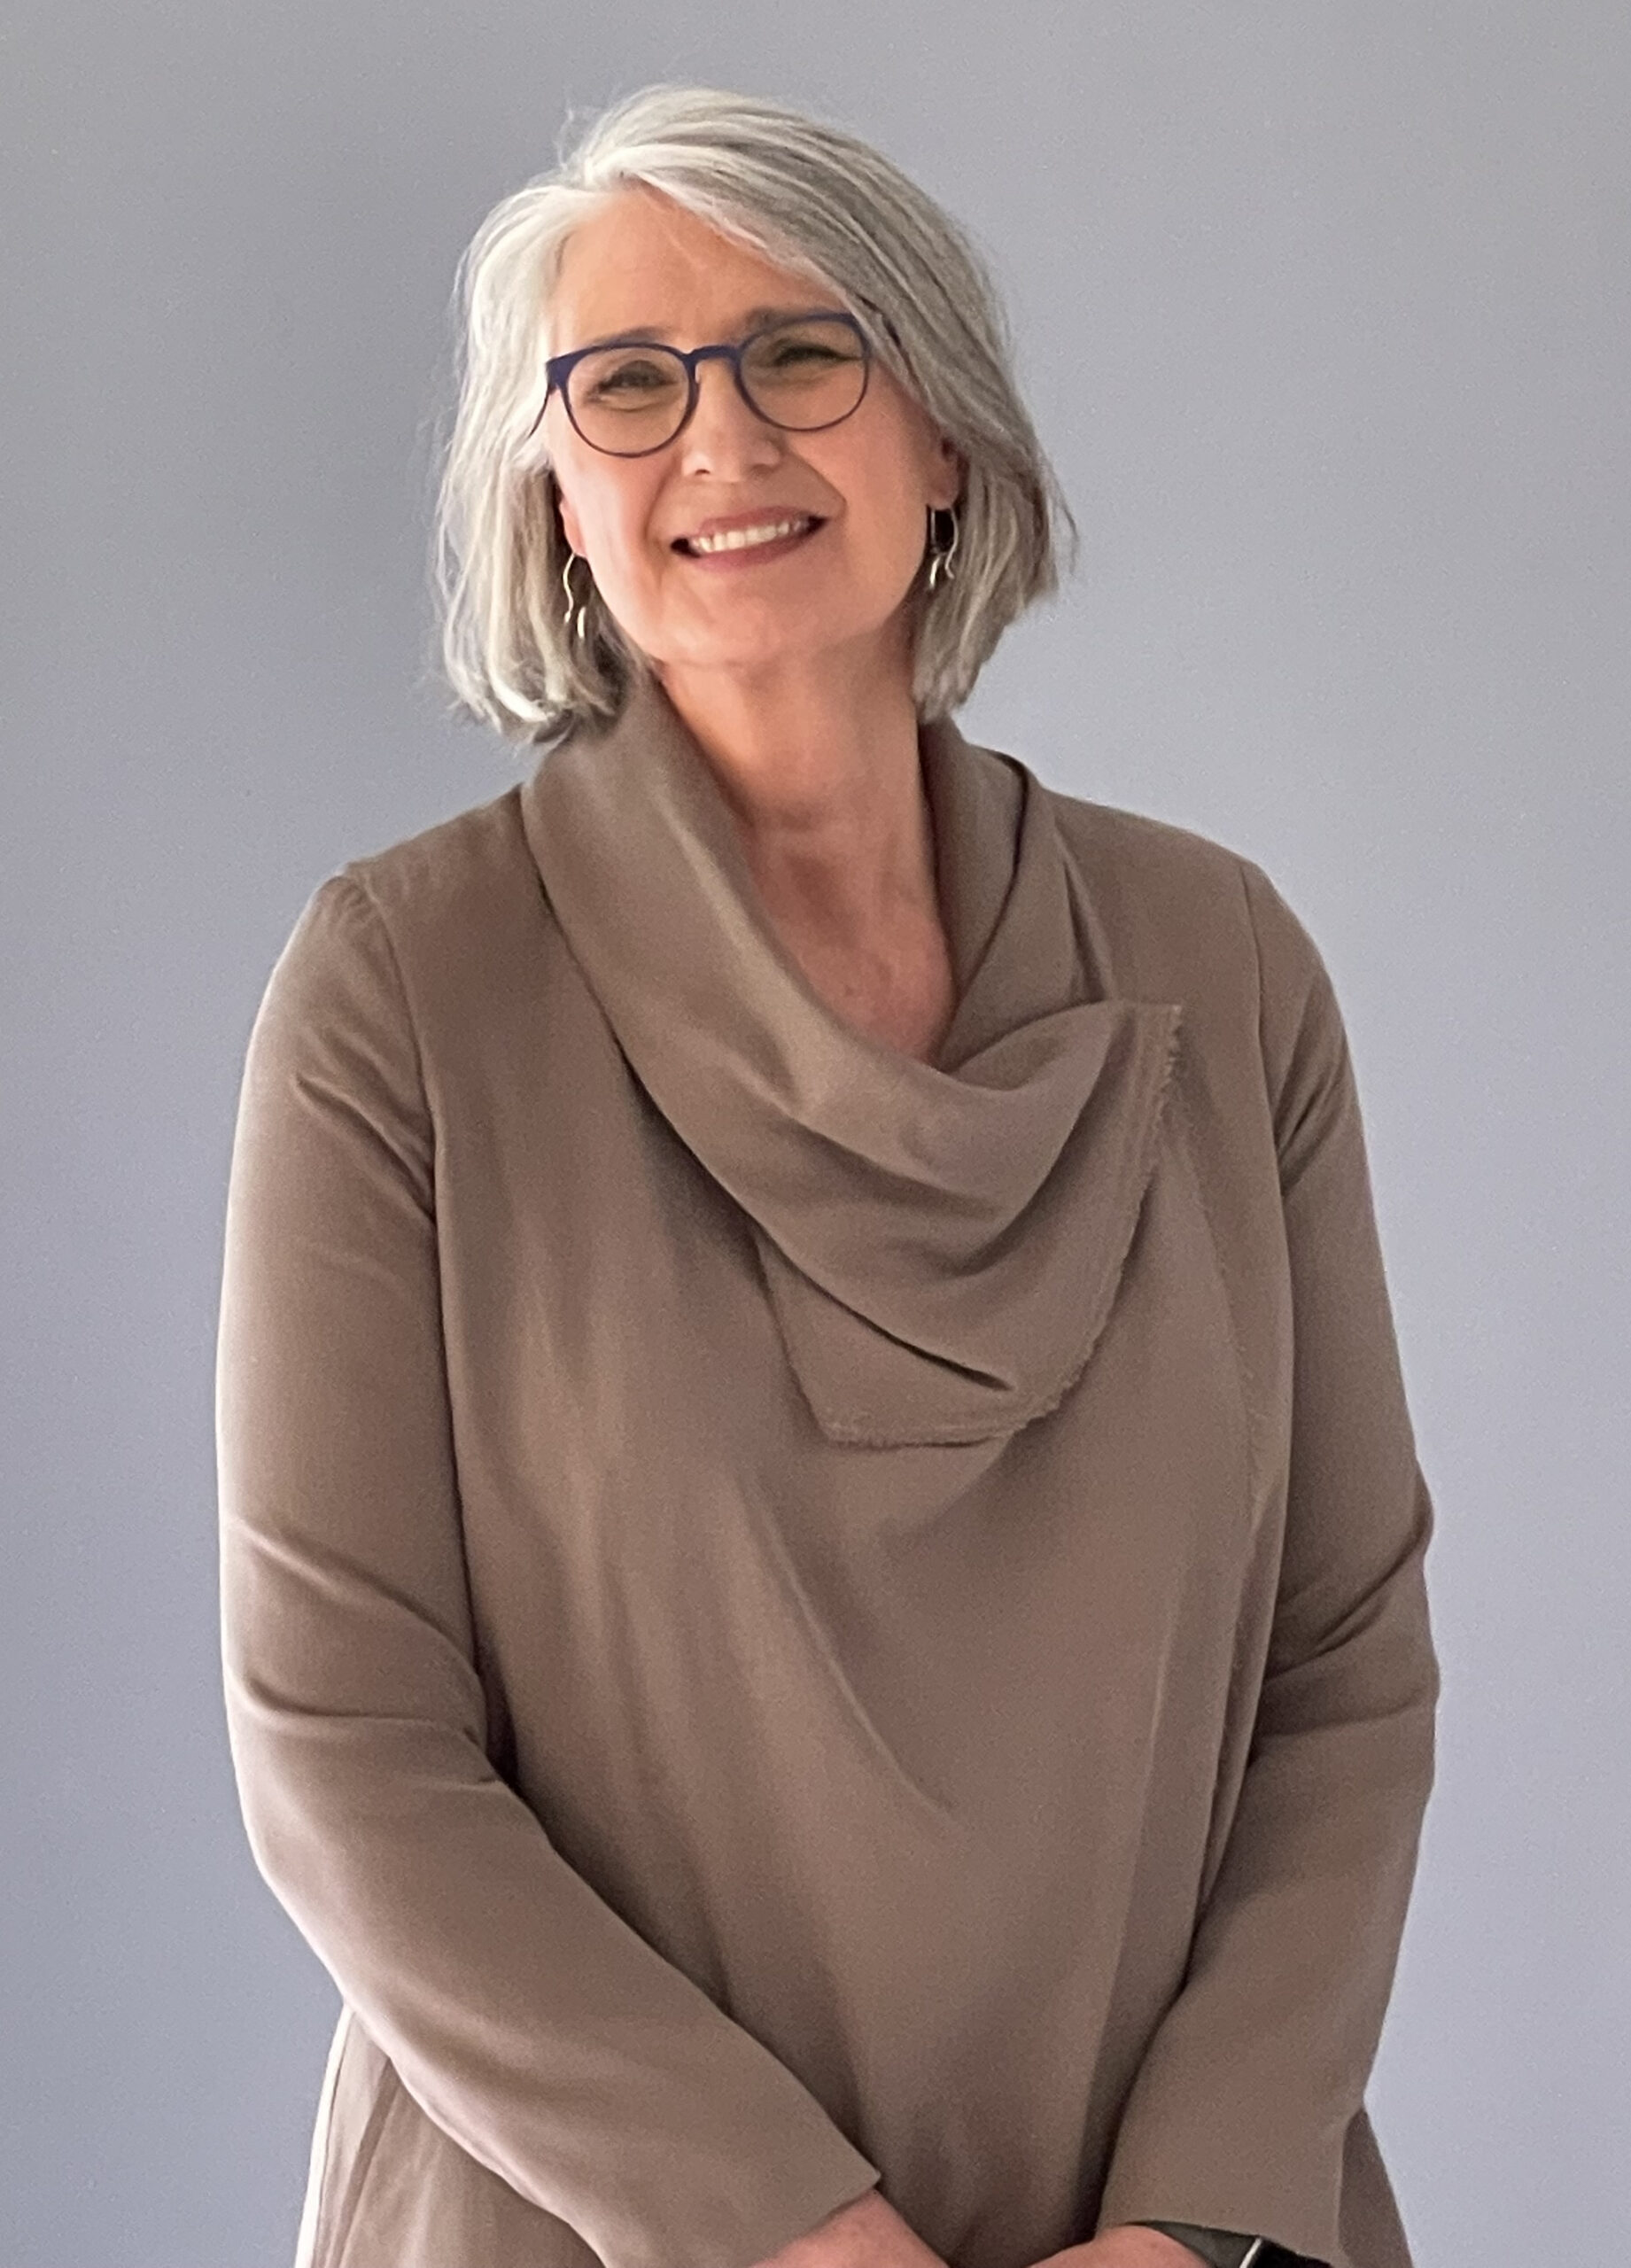 A Conversation with Louise Penny - Kolbe Times